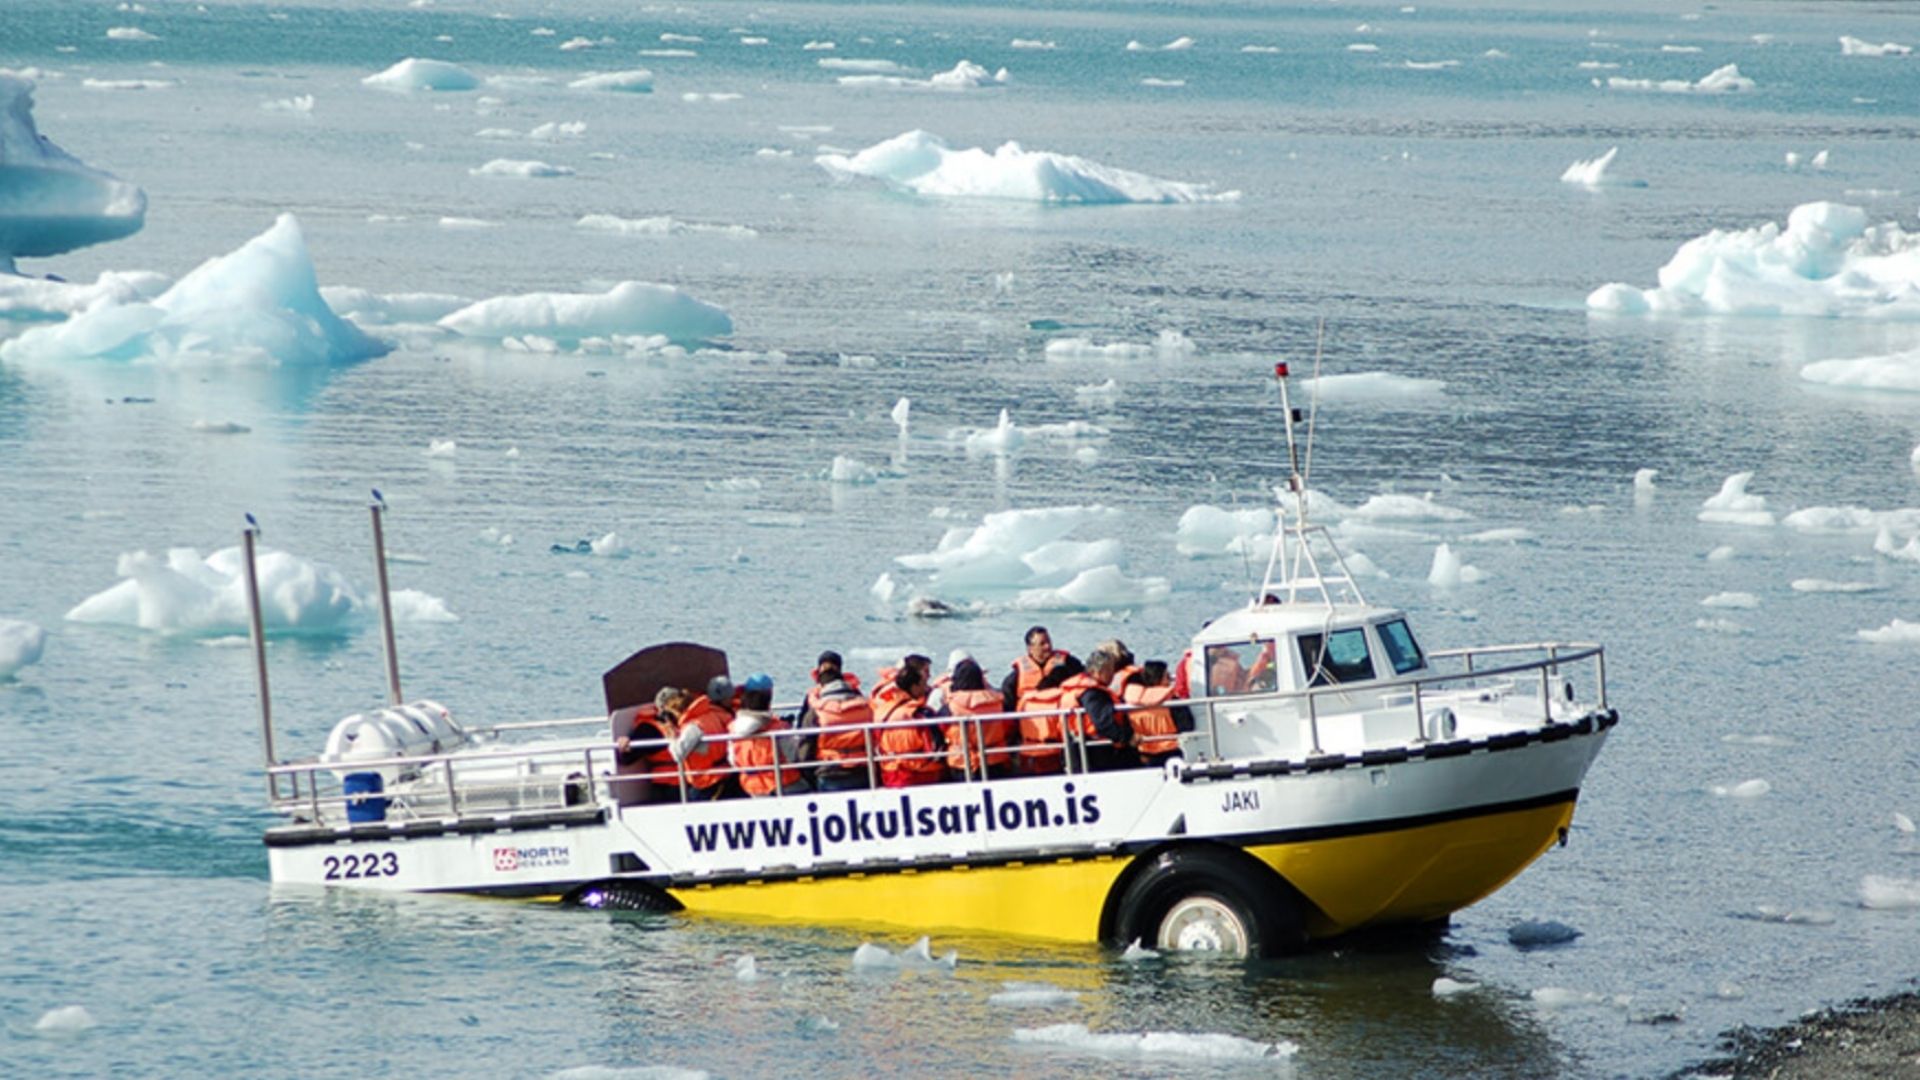 Amphibian Boat Tour on the Glacier Lagoon is one of the best attractions in Iceland